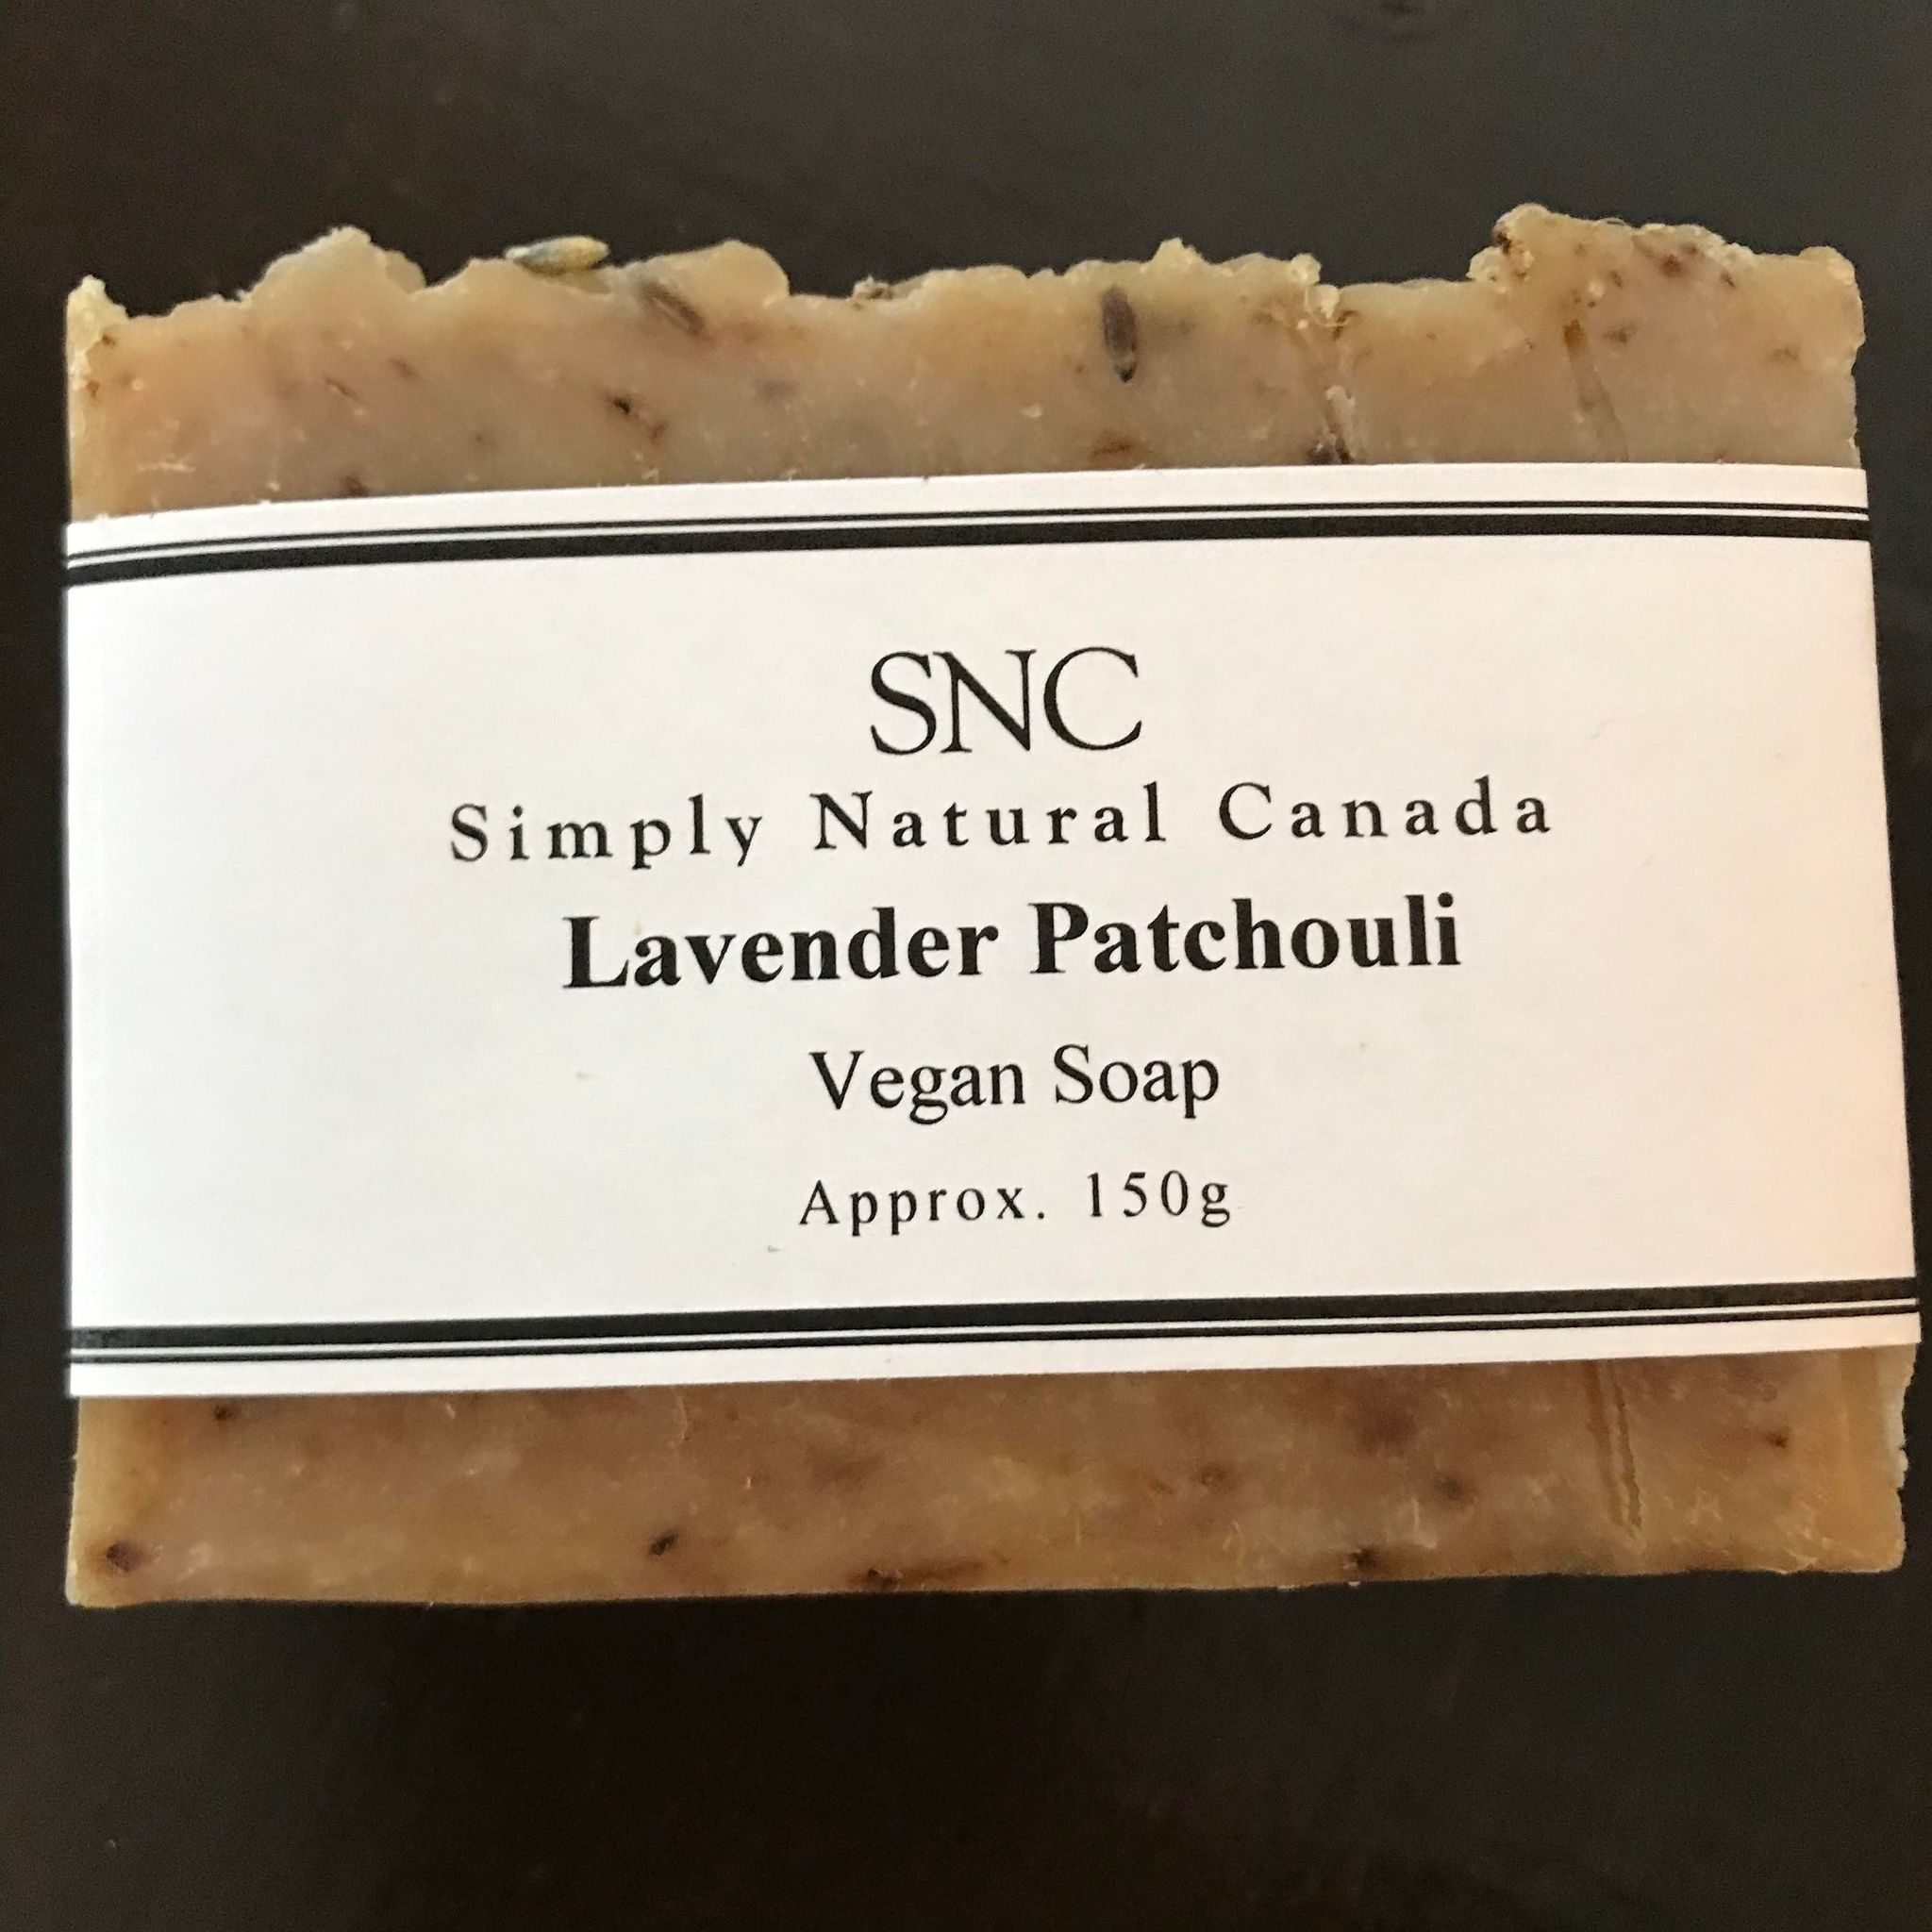  lavender patchouli natural vegan rectangular artisan soap lightly scented with essential oils made in canada by simply natural canada